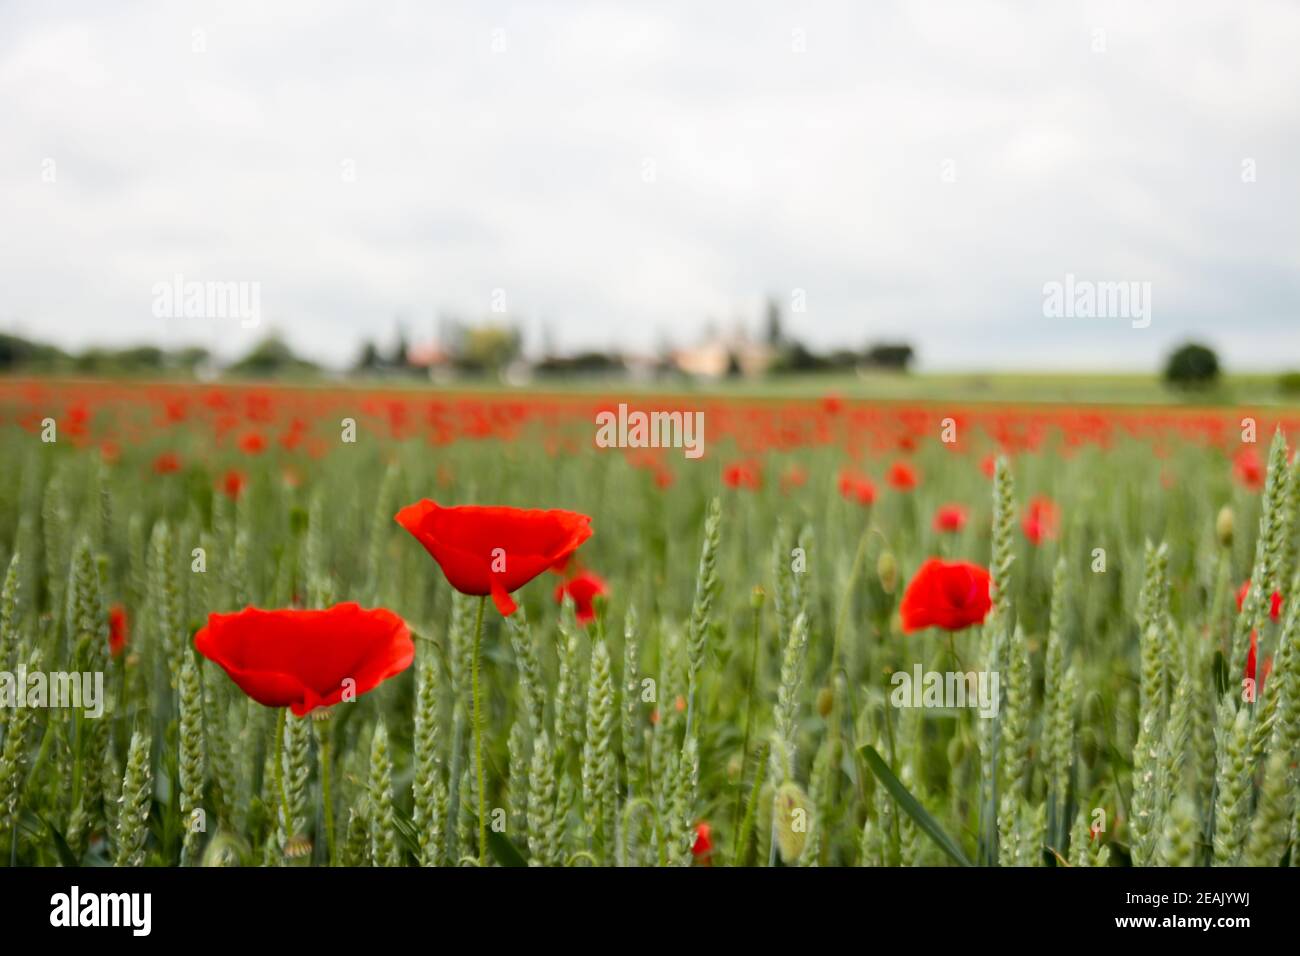 Common poppy flower being blown by wind in a field of wheat during a cloudy day. papaver rhoeas Stock Photo